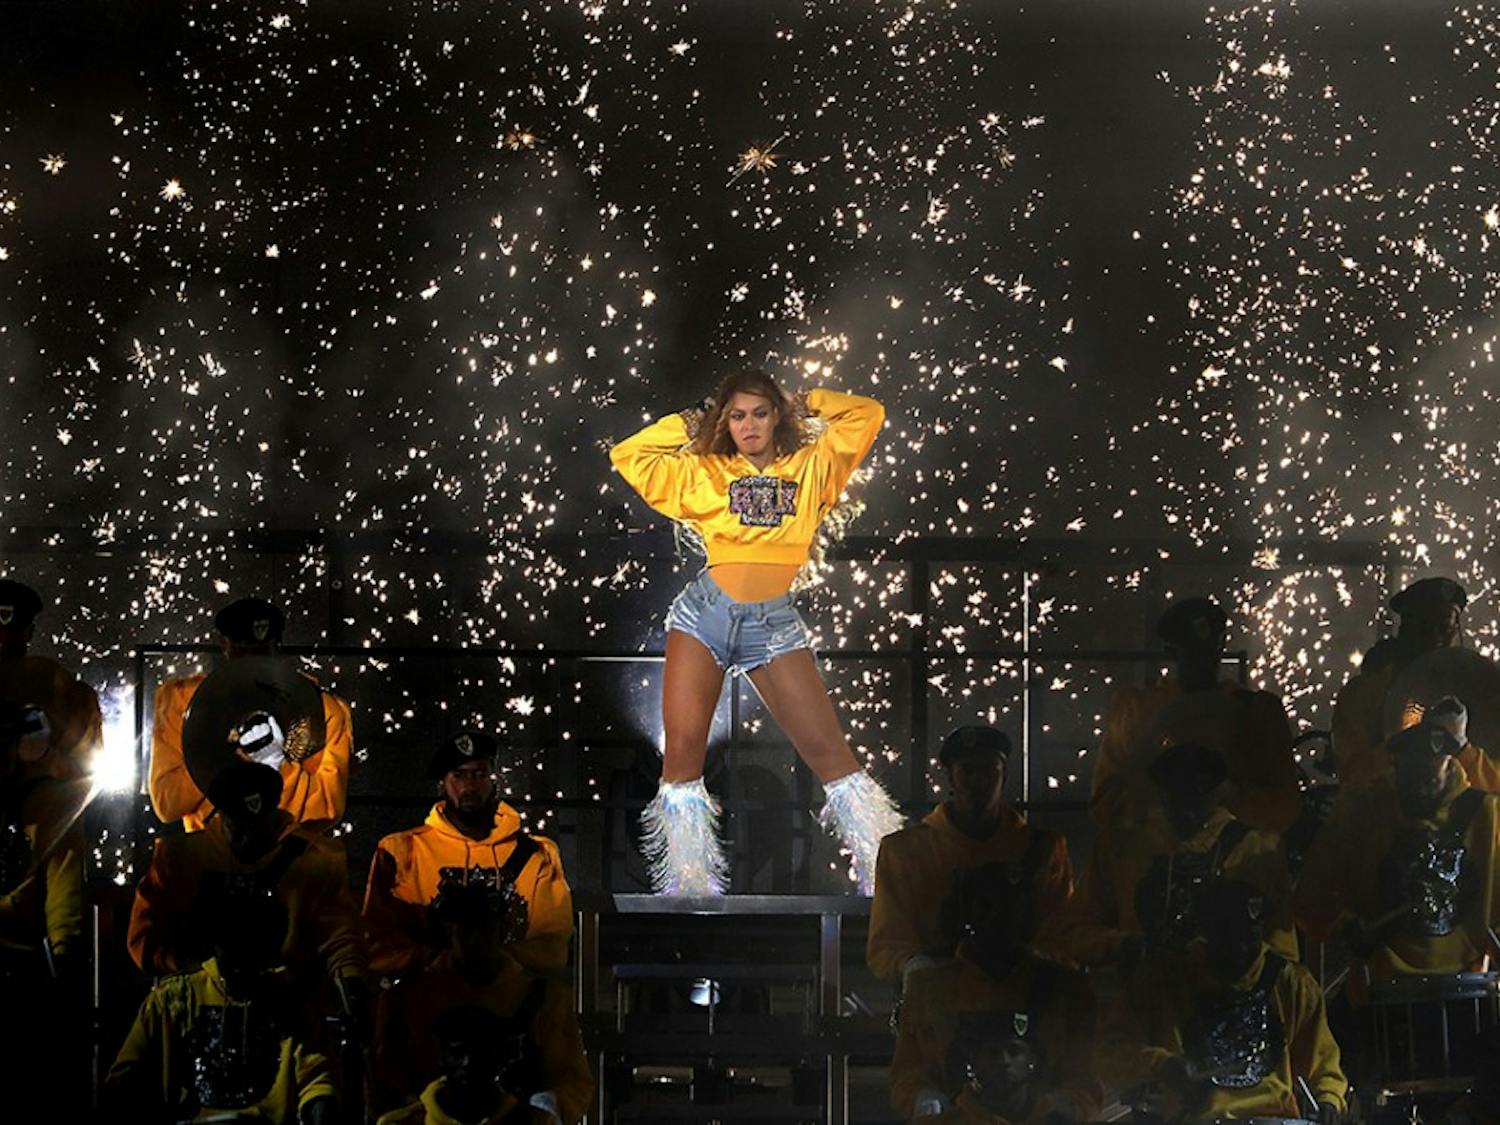 Beyonce performs at the Coachella Music and Arts Festival on Saturday, April 14, 2018 in Indio, Calif. (Luis Sinco/Los Angeles Times/TNS)